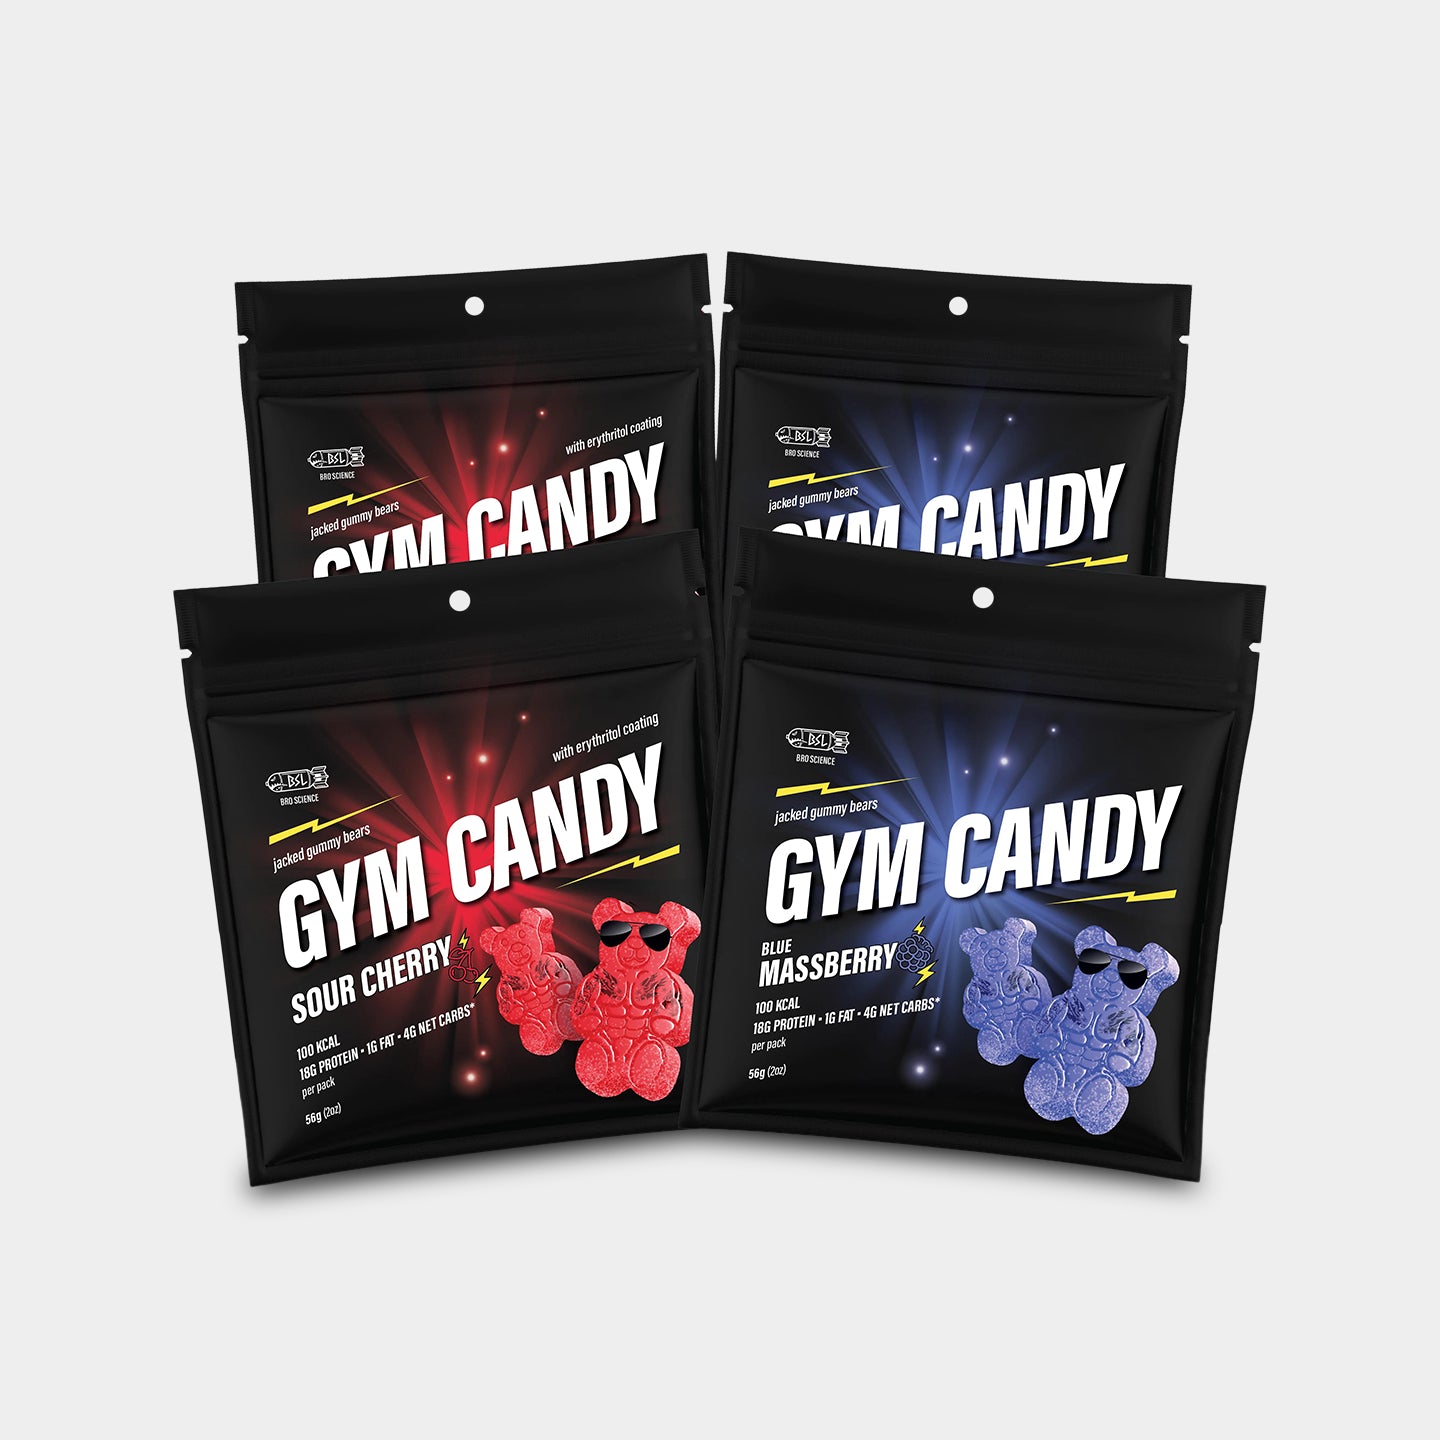 Gym Candy Jacked Gummy Bears, Variety, 2oz - 4 Pack A1